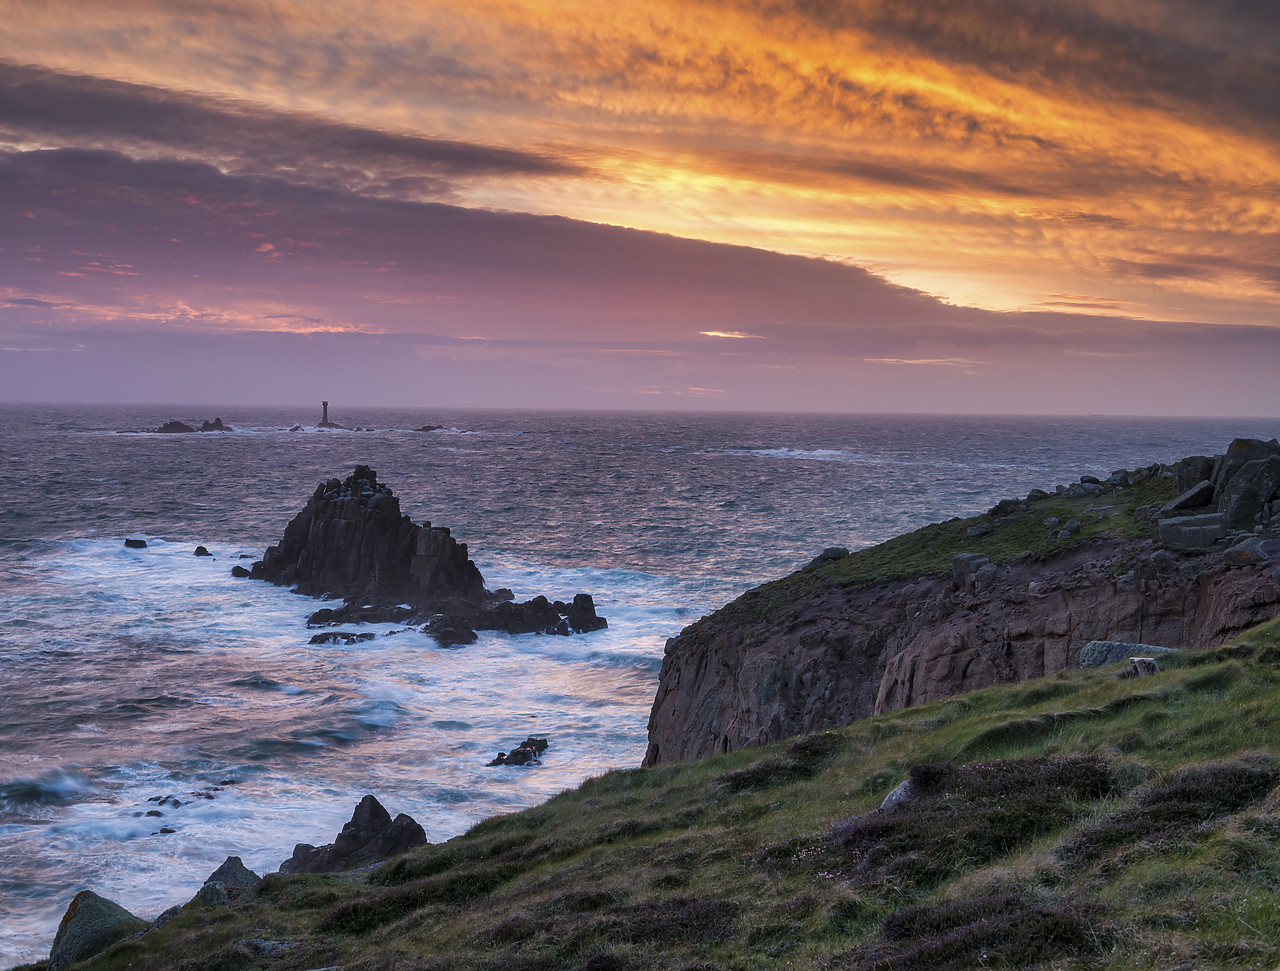 #190261-1 - Land's End at Sunset, Cornwall, England